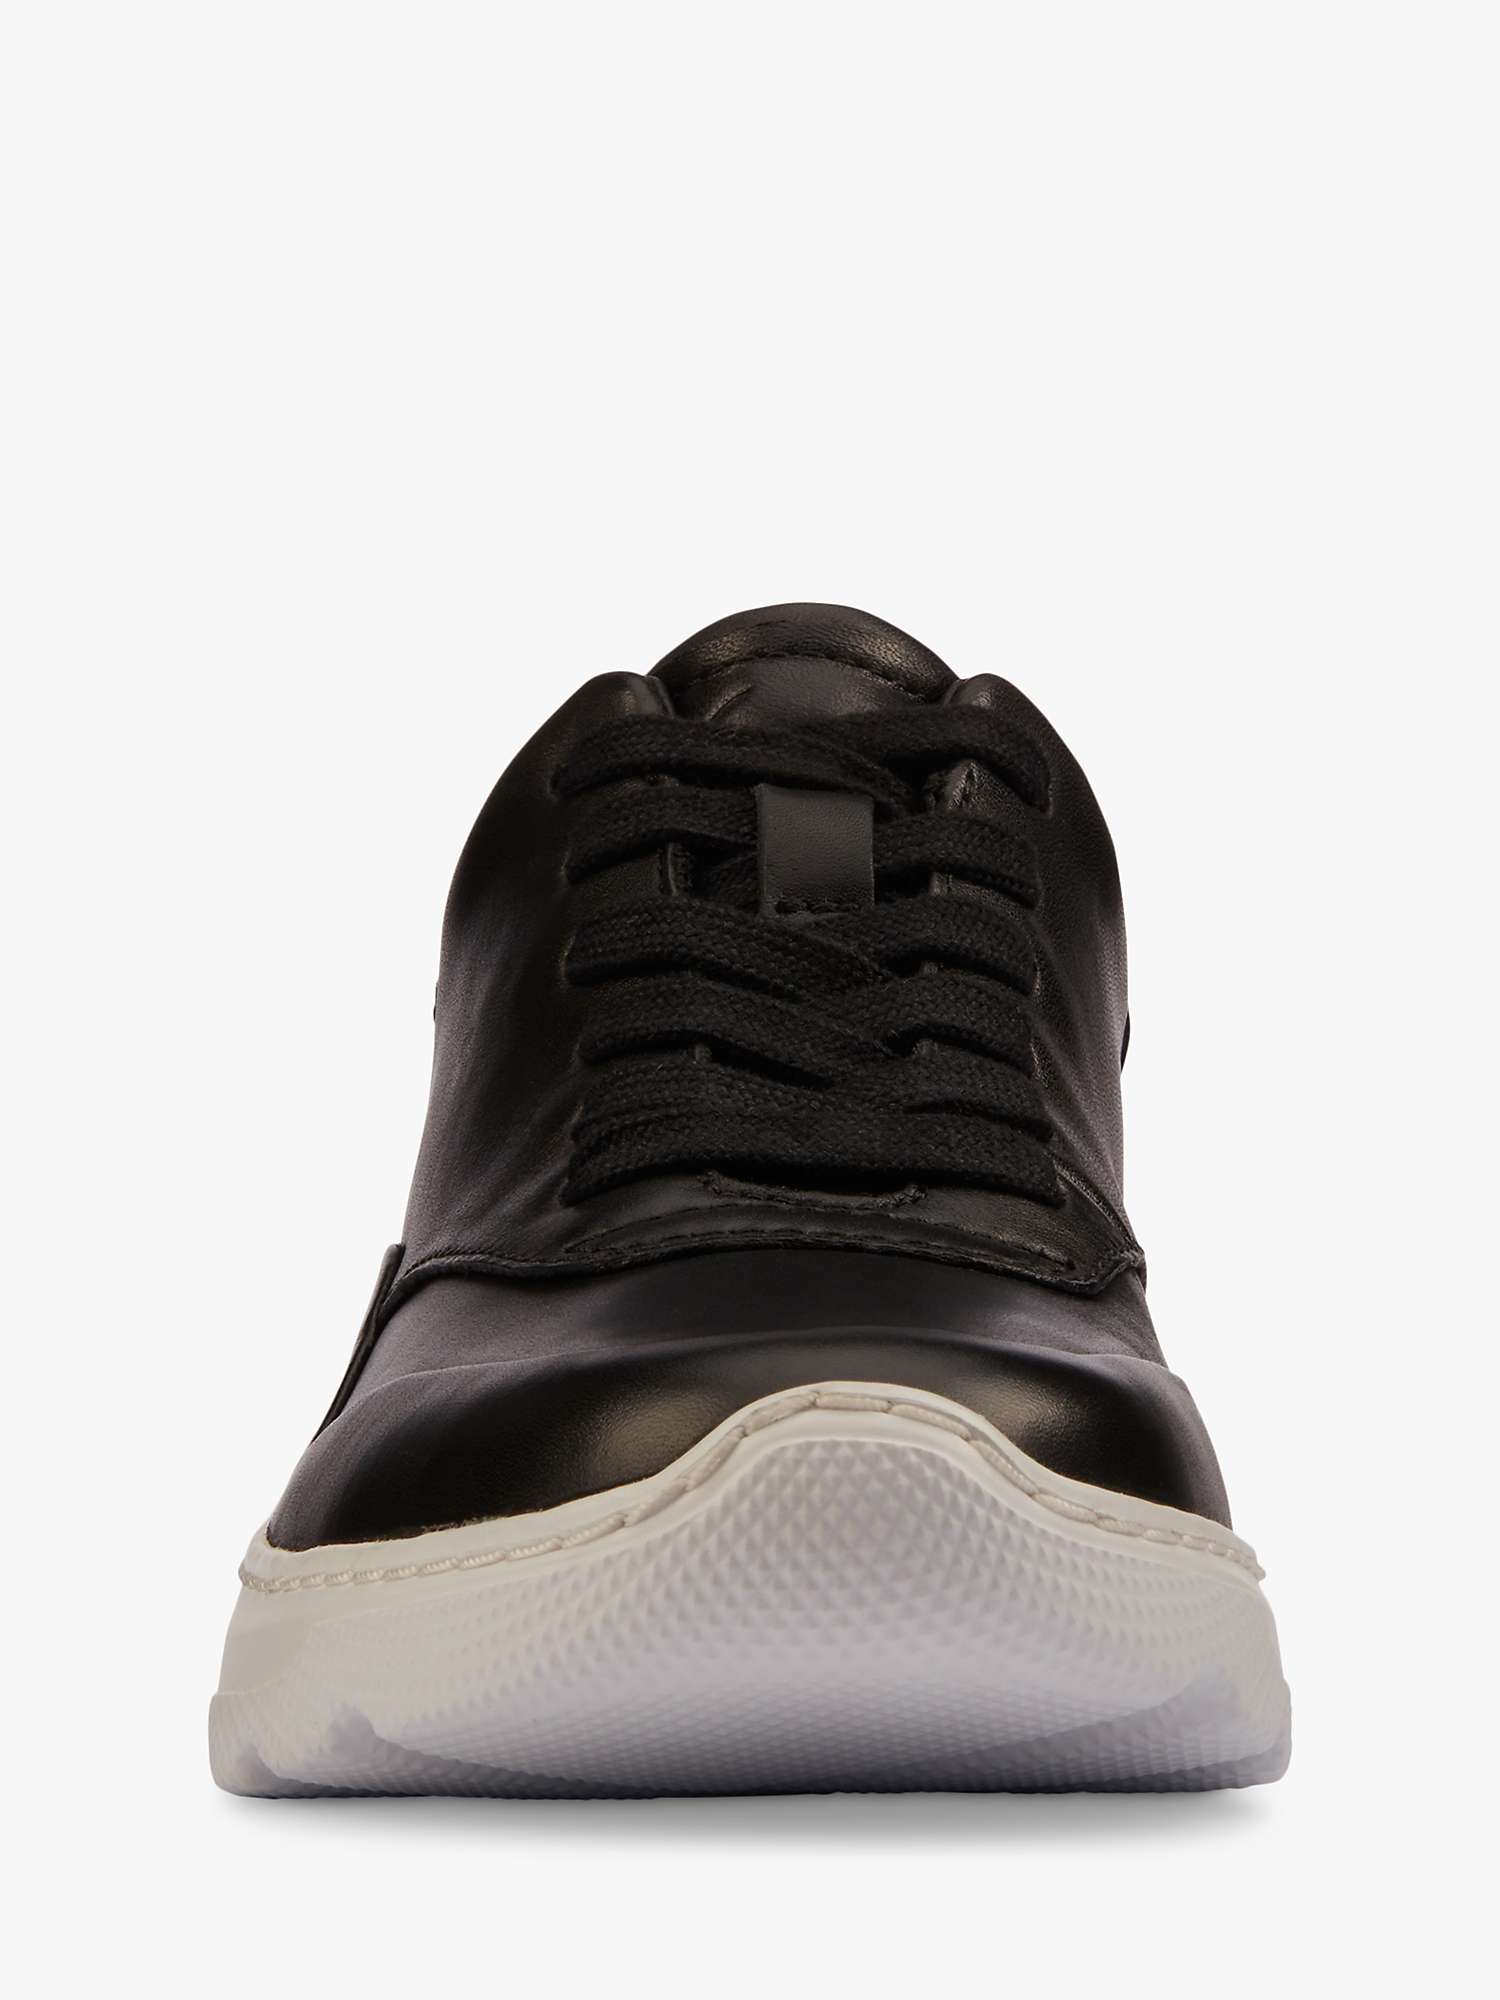 Buy Clarks Sprint Lite Lace Up Leather Trainers, Black Online at johnlewis.com